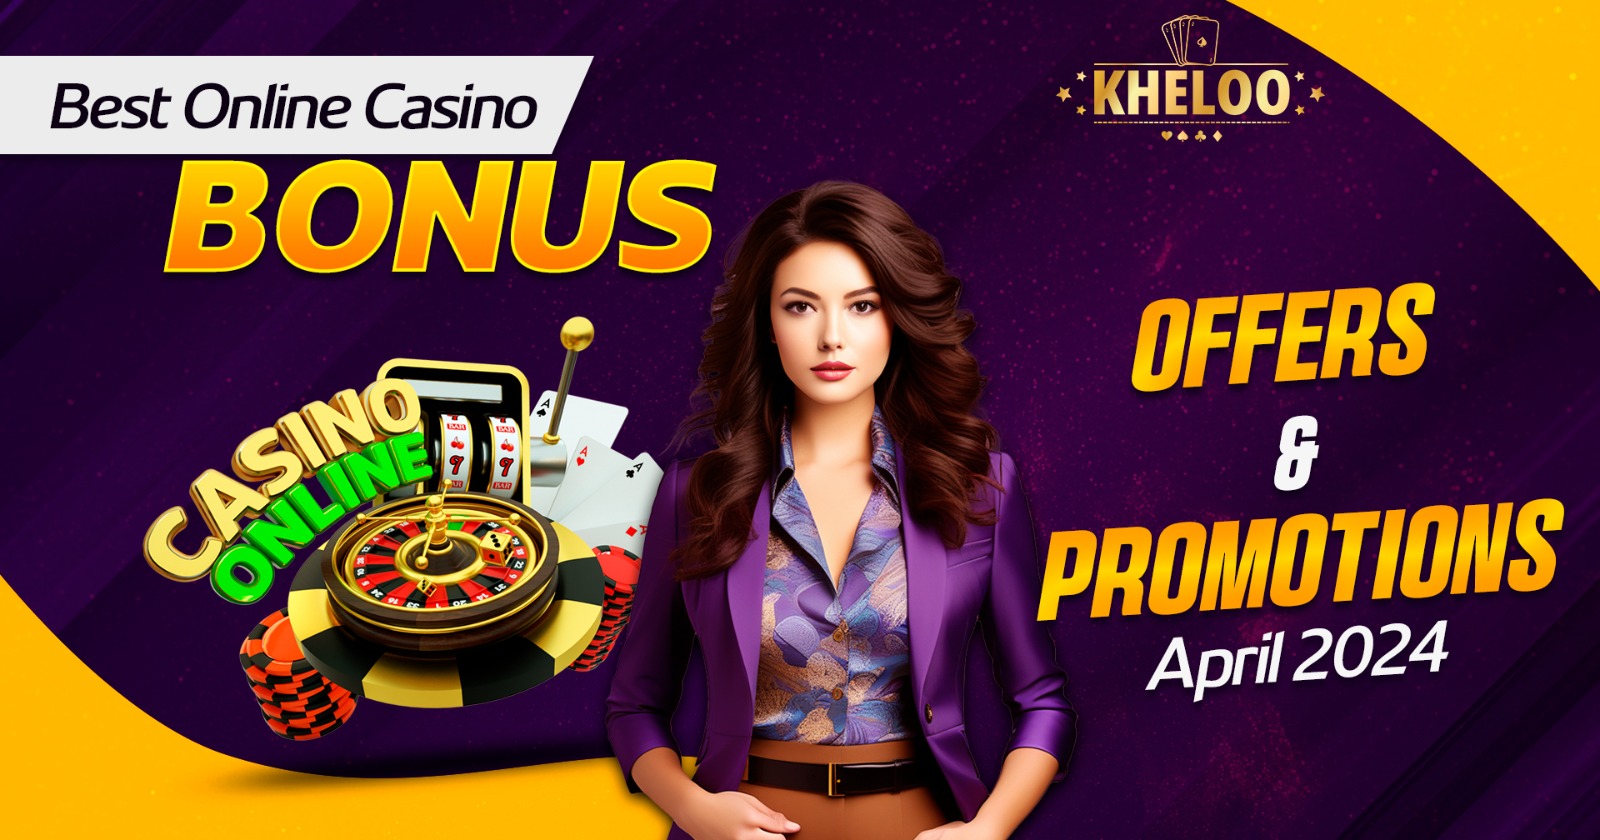 How To Save Money with Digital vs. Traditional: Contrasting Casino Experiences in India?